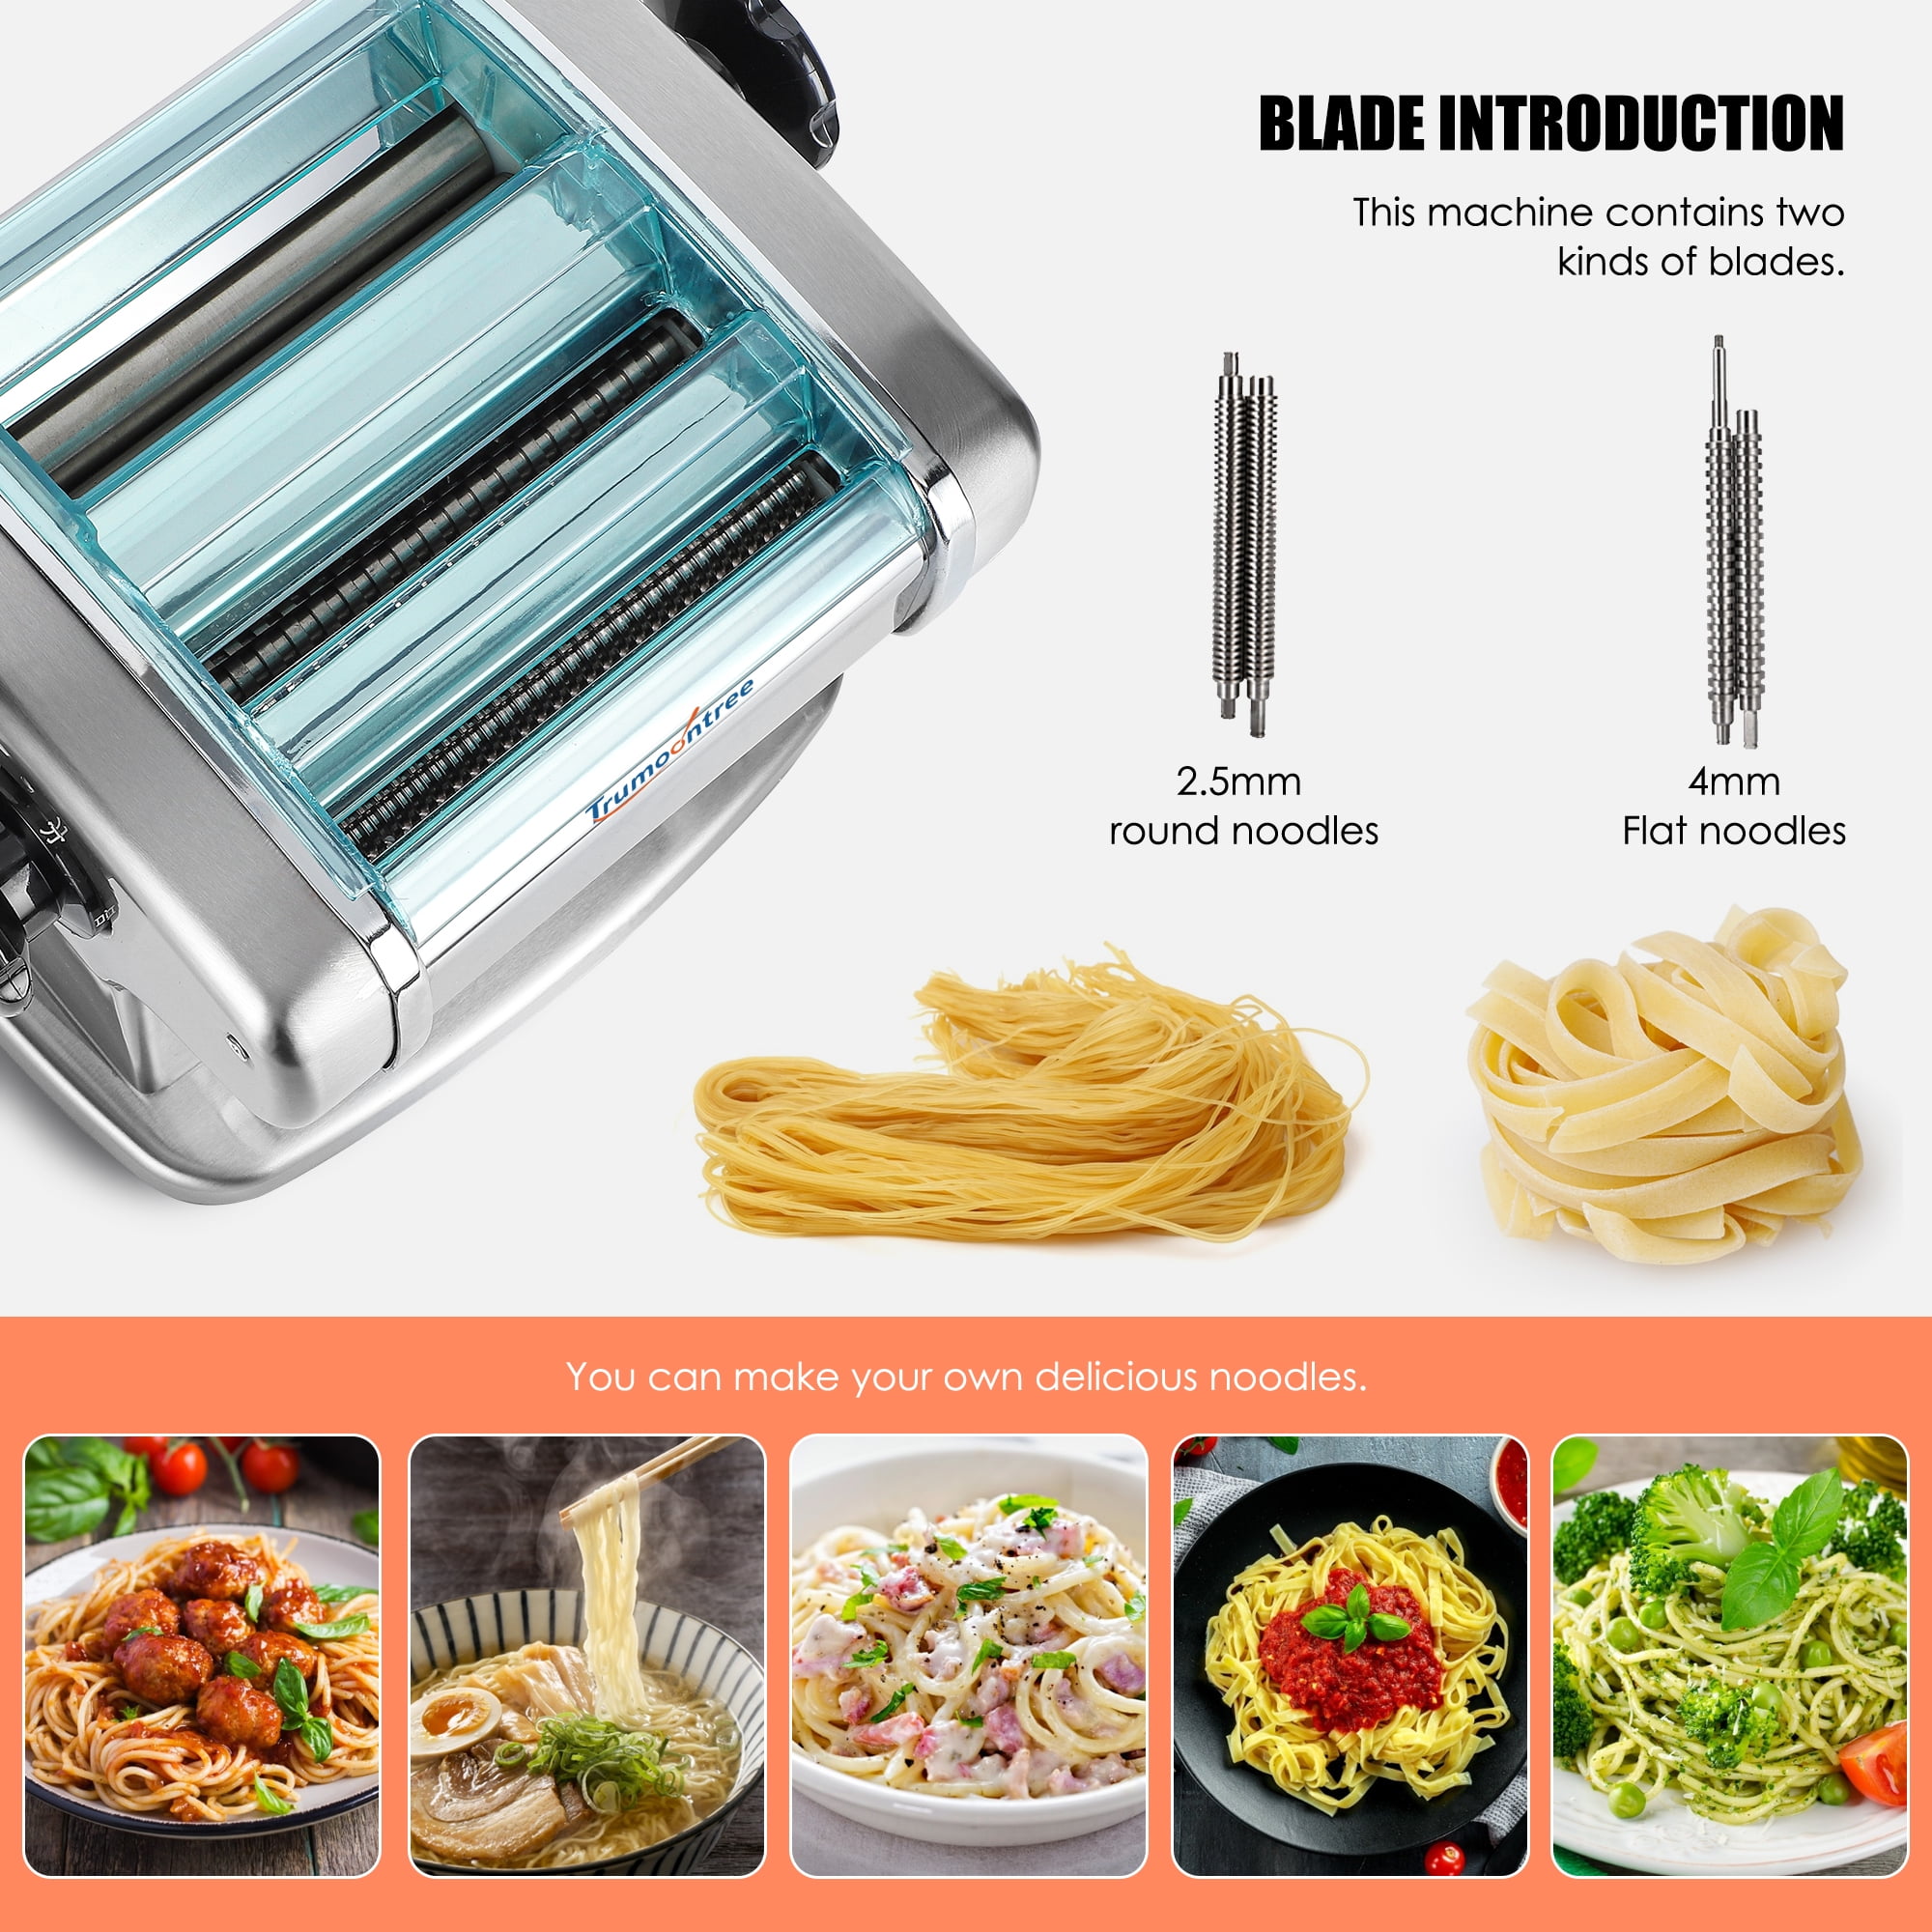 Blue)Electric Automatic Pasta Maker Stainless Steel Handheld Pasta